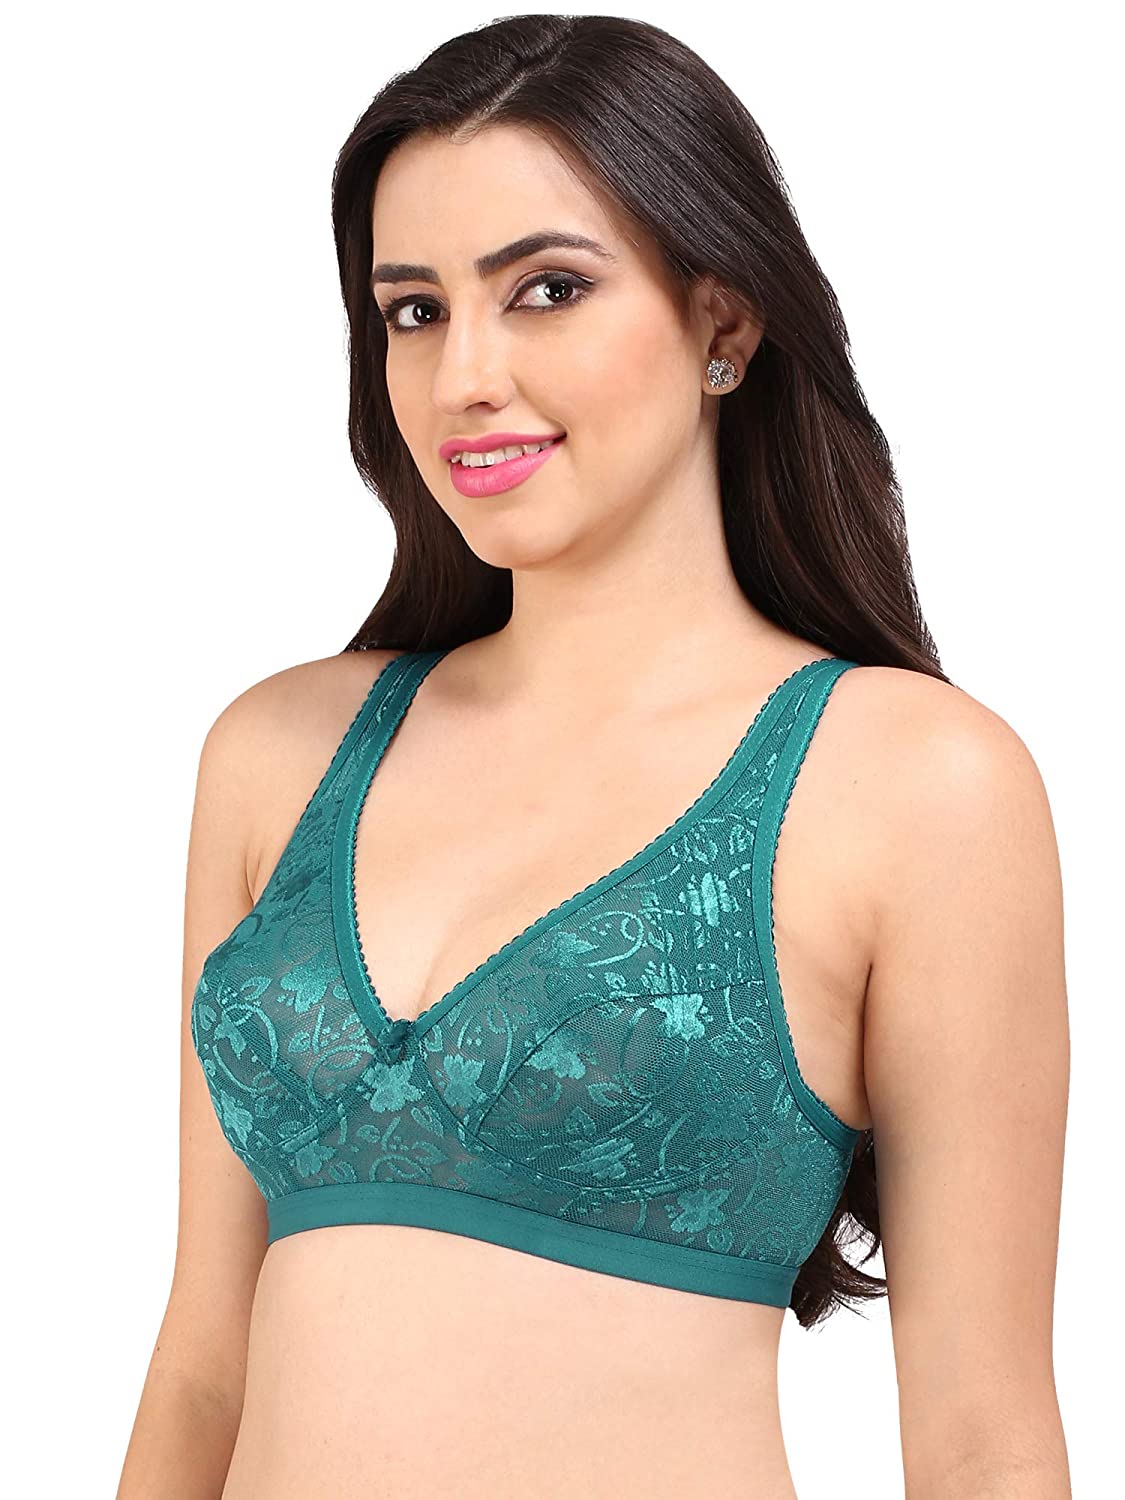 Shalini Full Coverage Lace Bra with Side Support for Plus Size